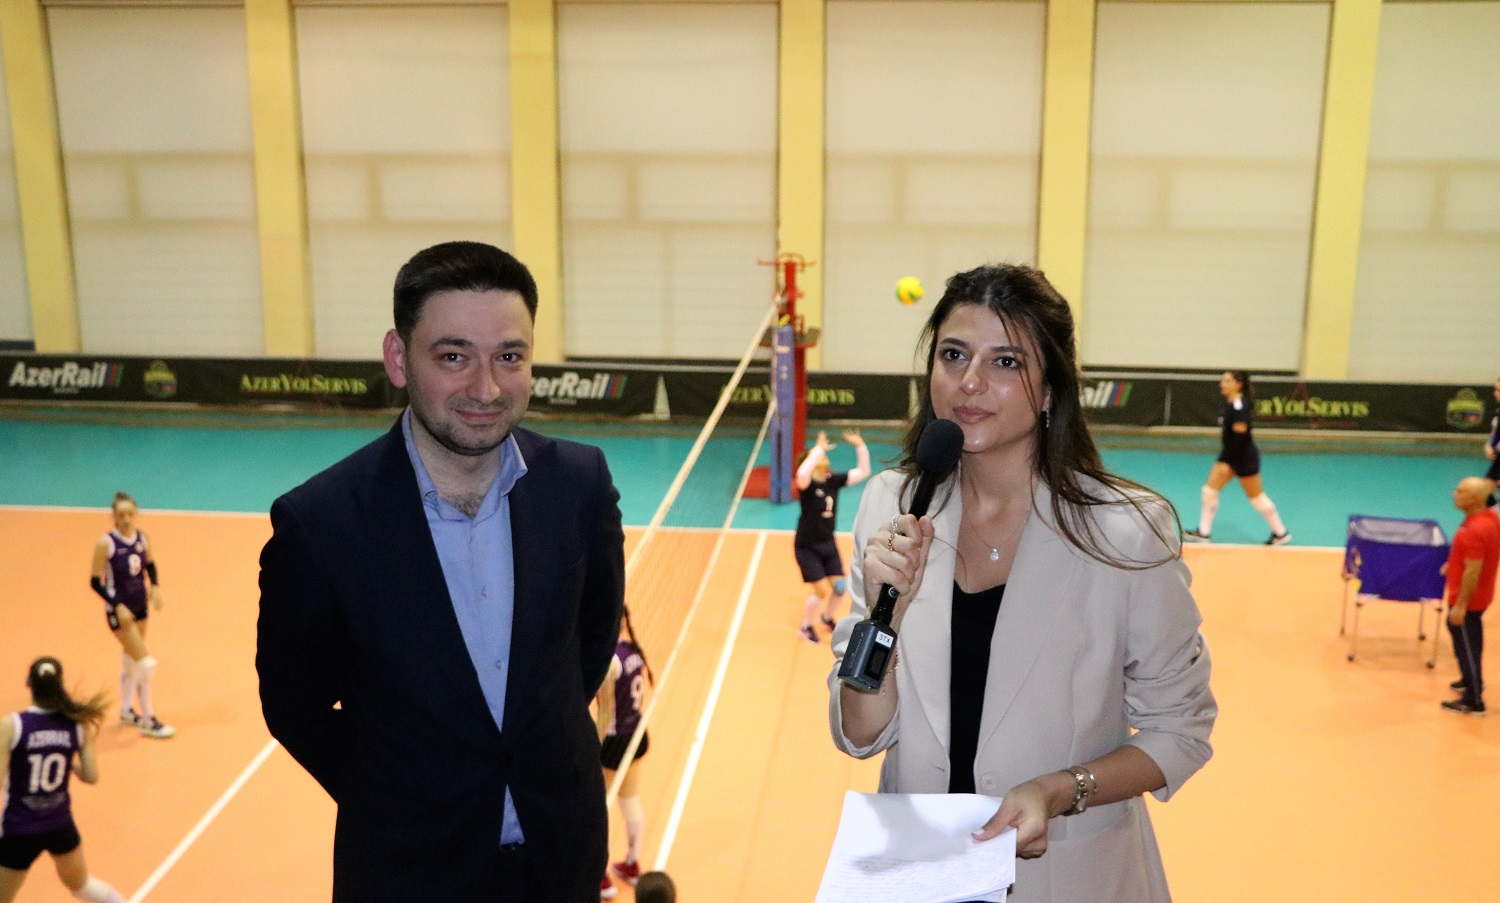 Azerbaijan Volleyball league now available for fans to follow through live streaming InsideCEV